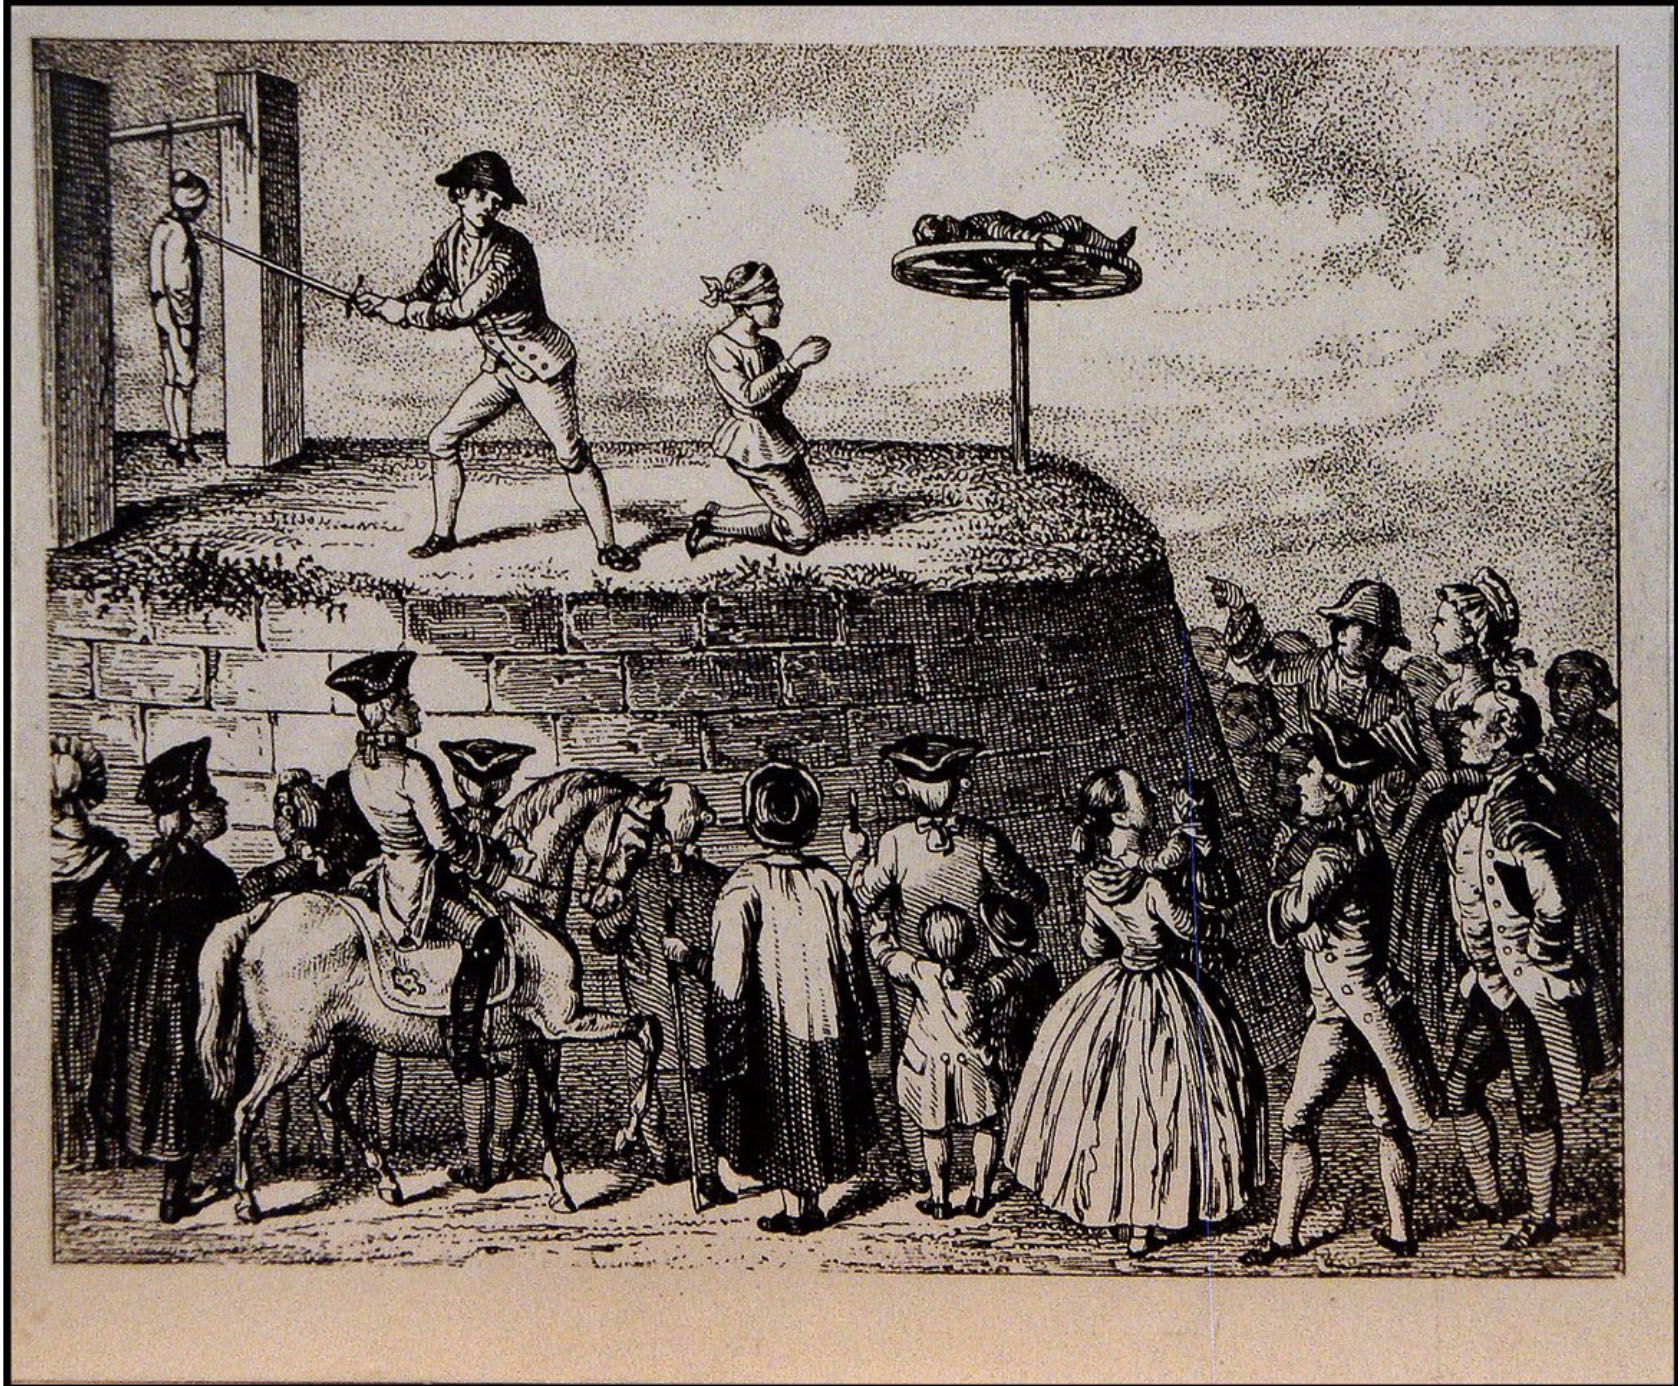 Depiction of a public beheading from 18th century Germany